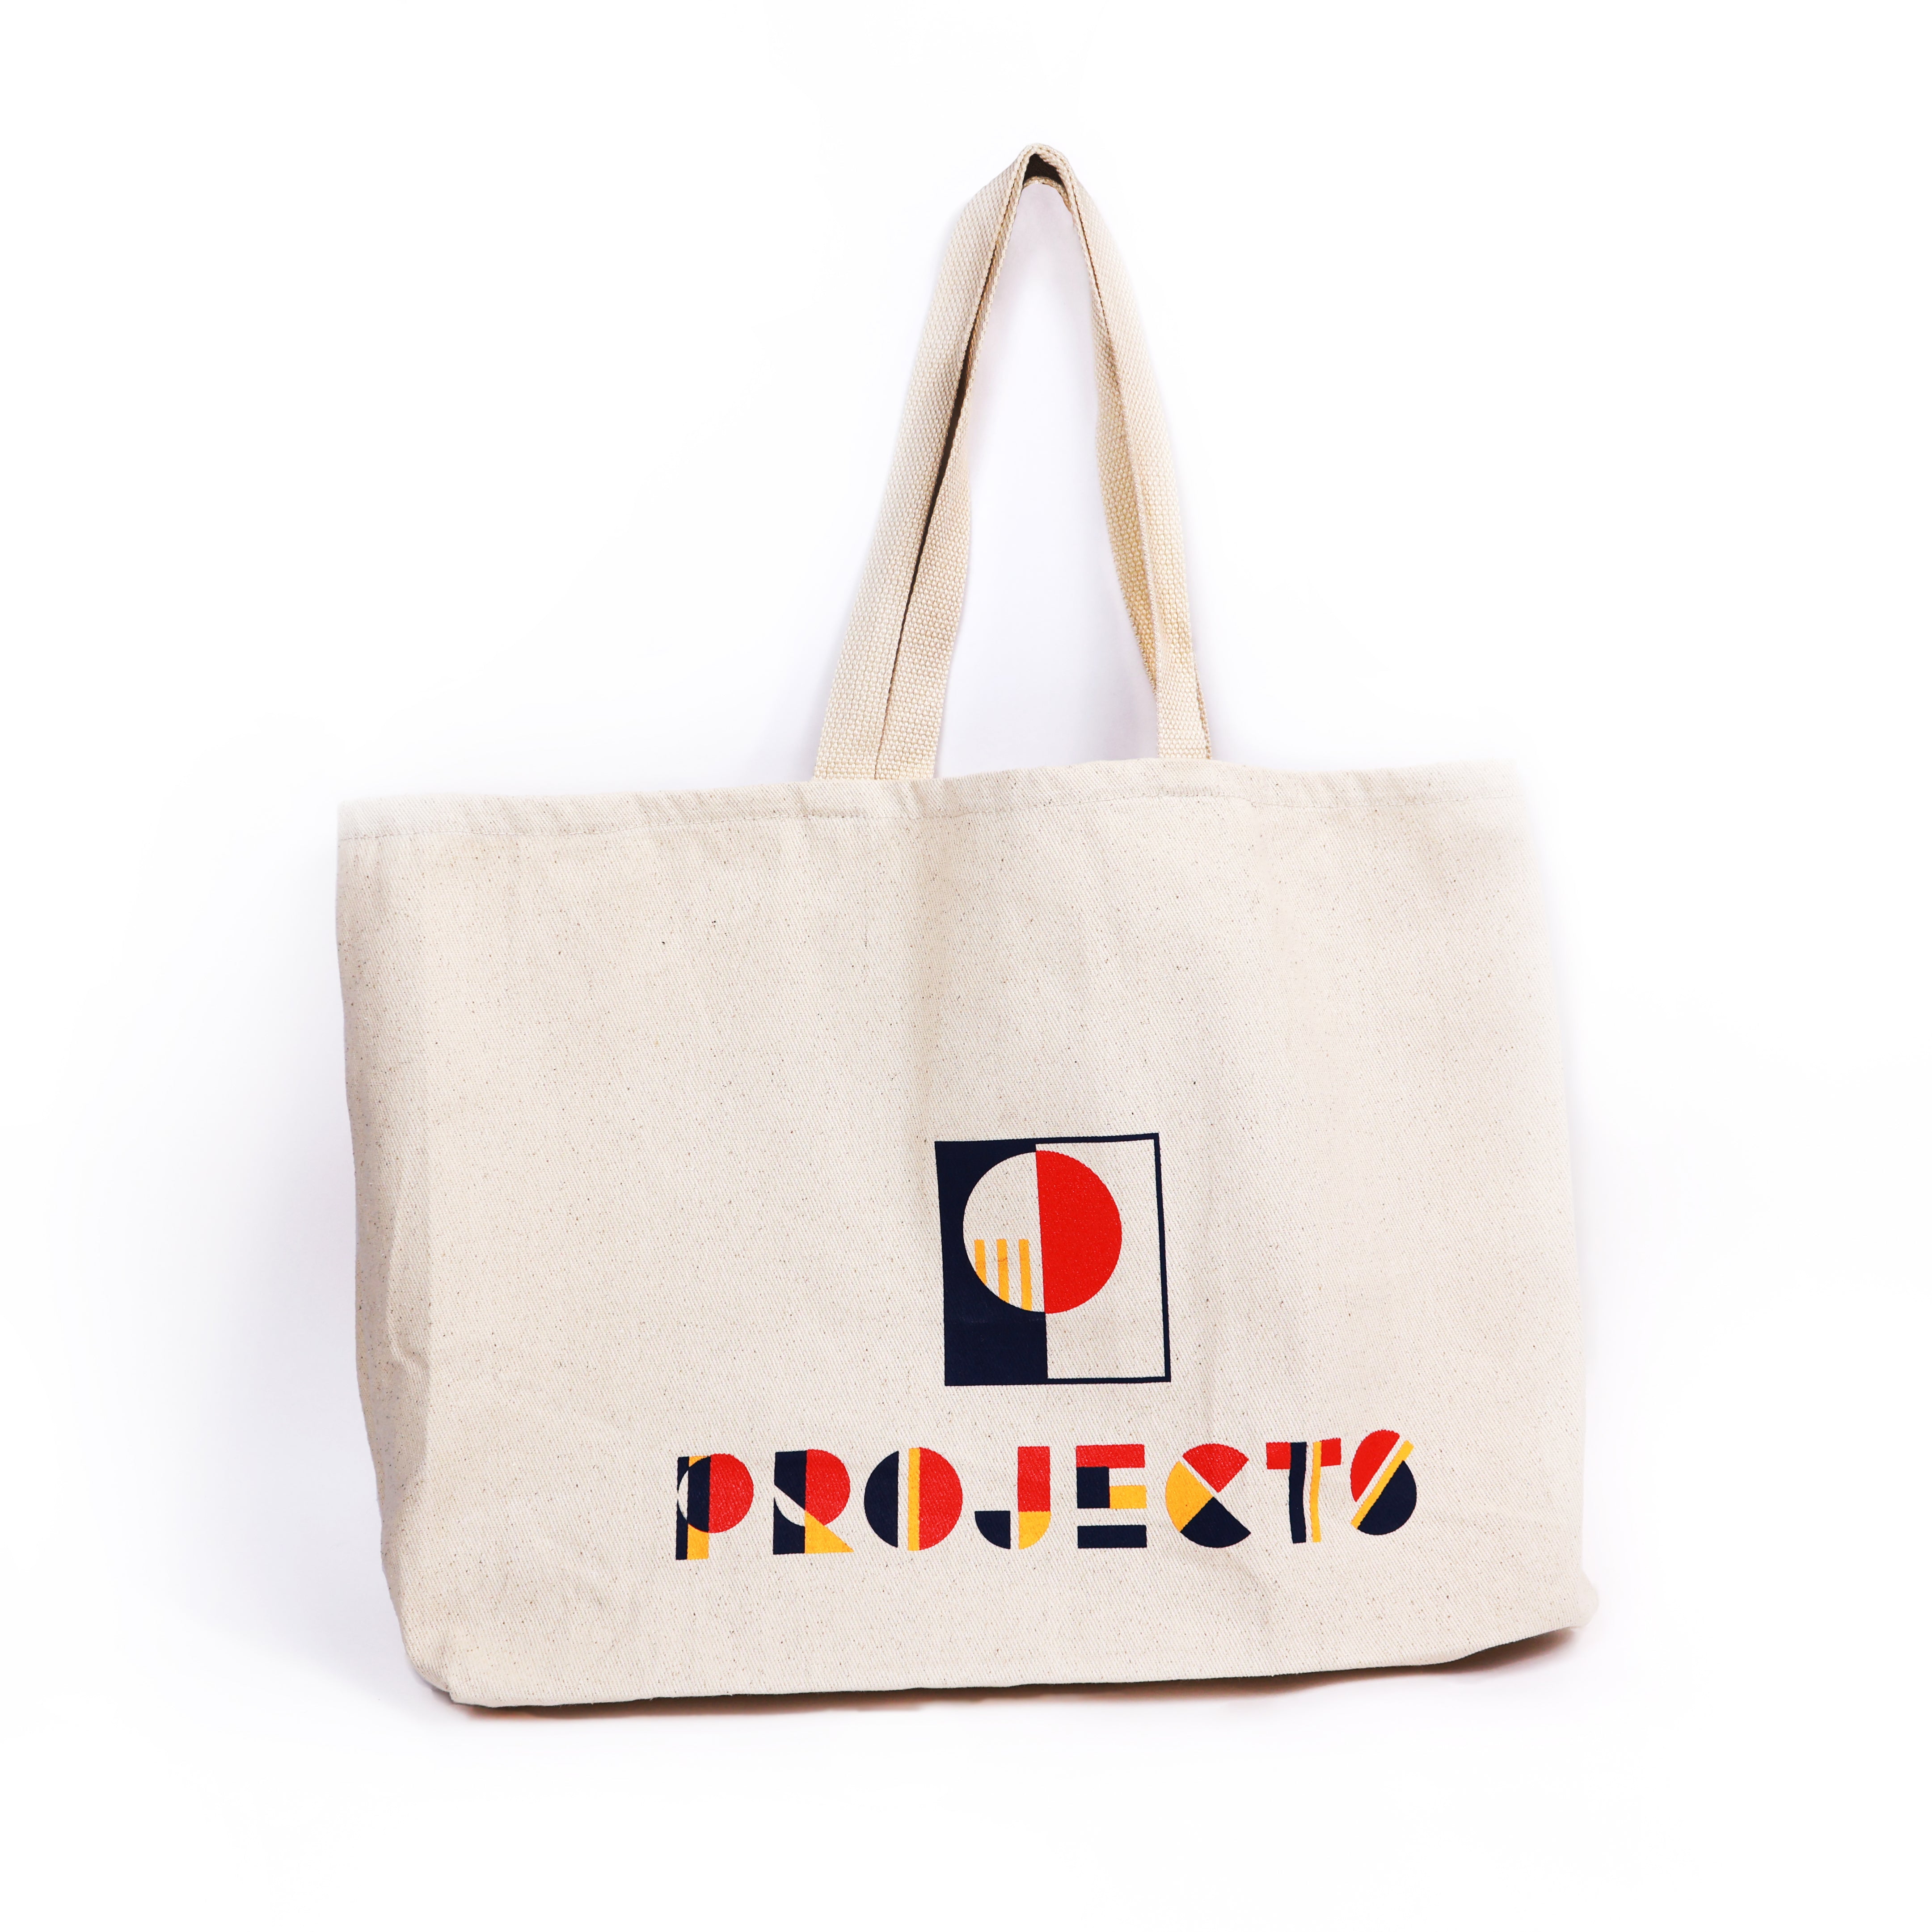 Tote Bag - Projects Watches